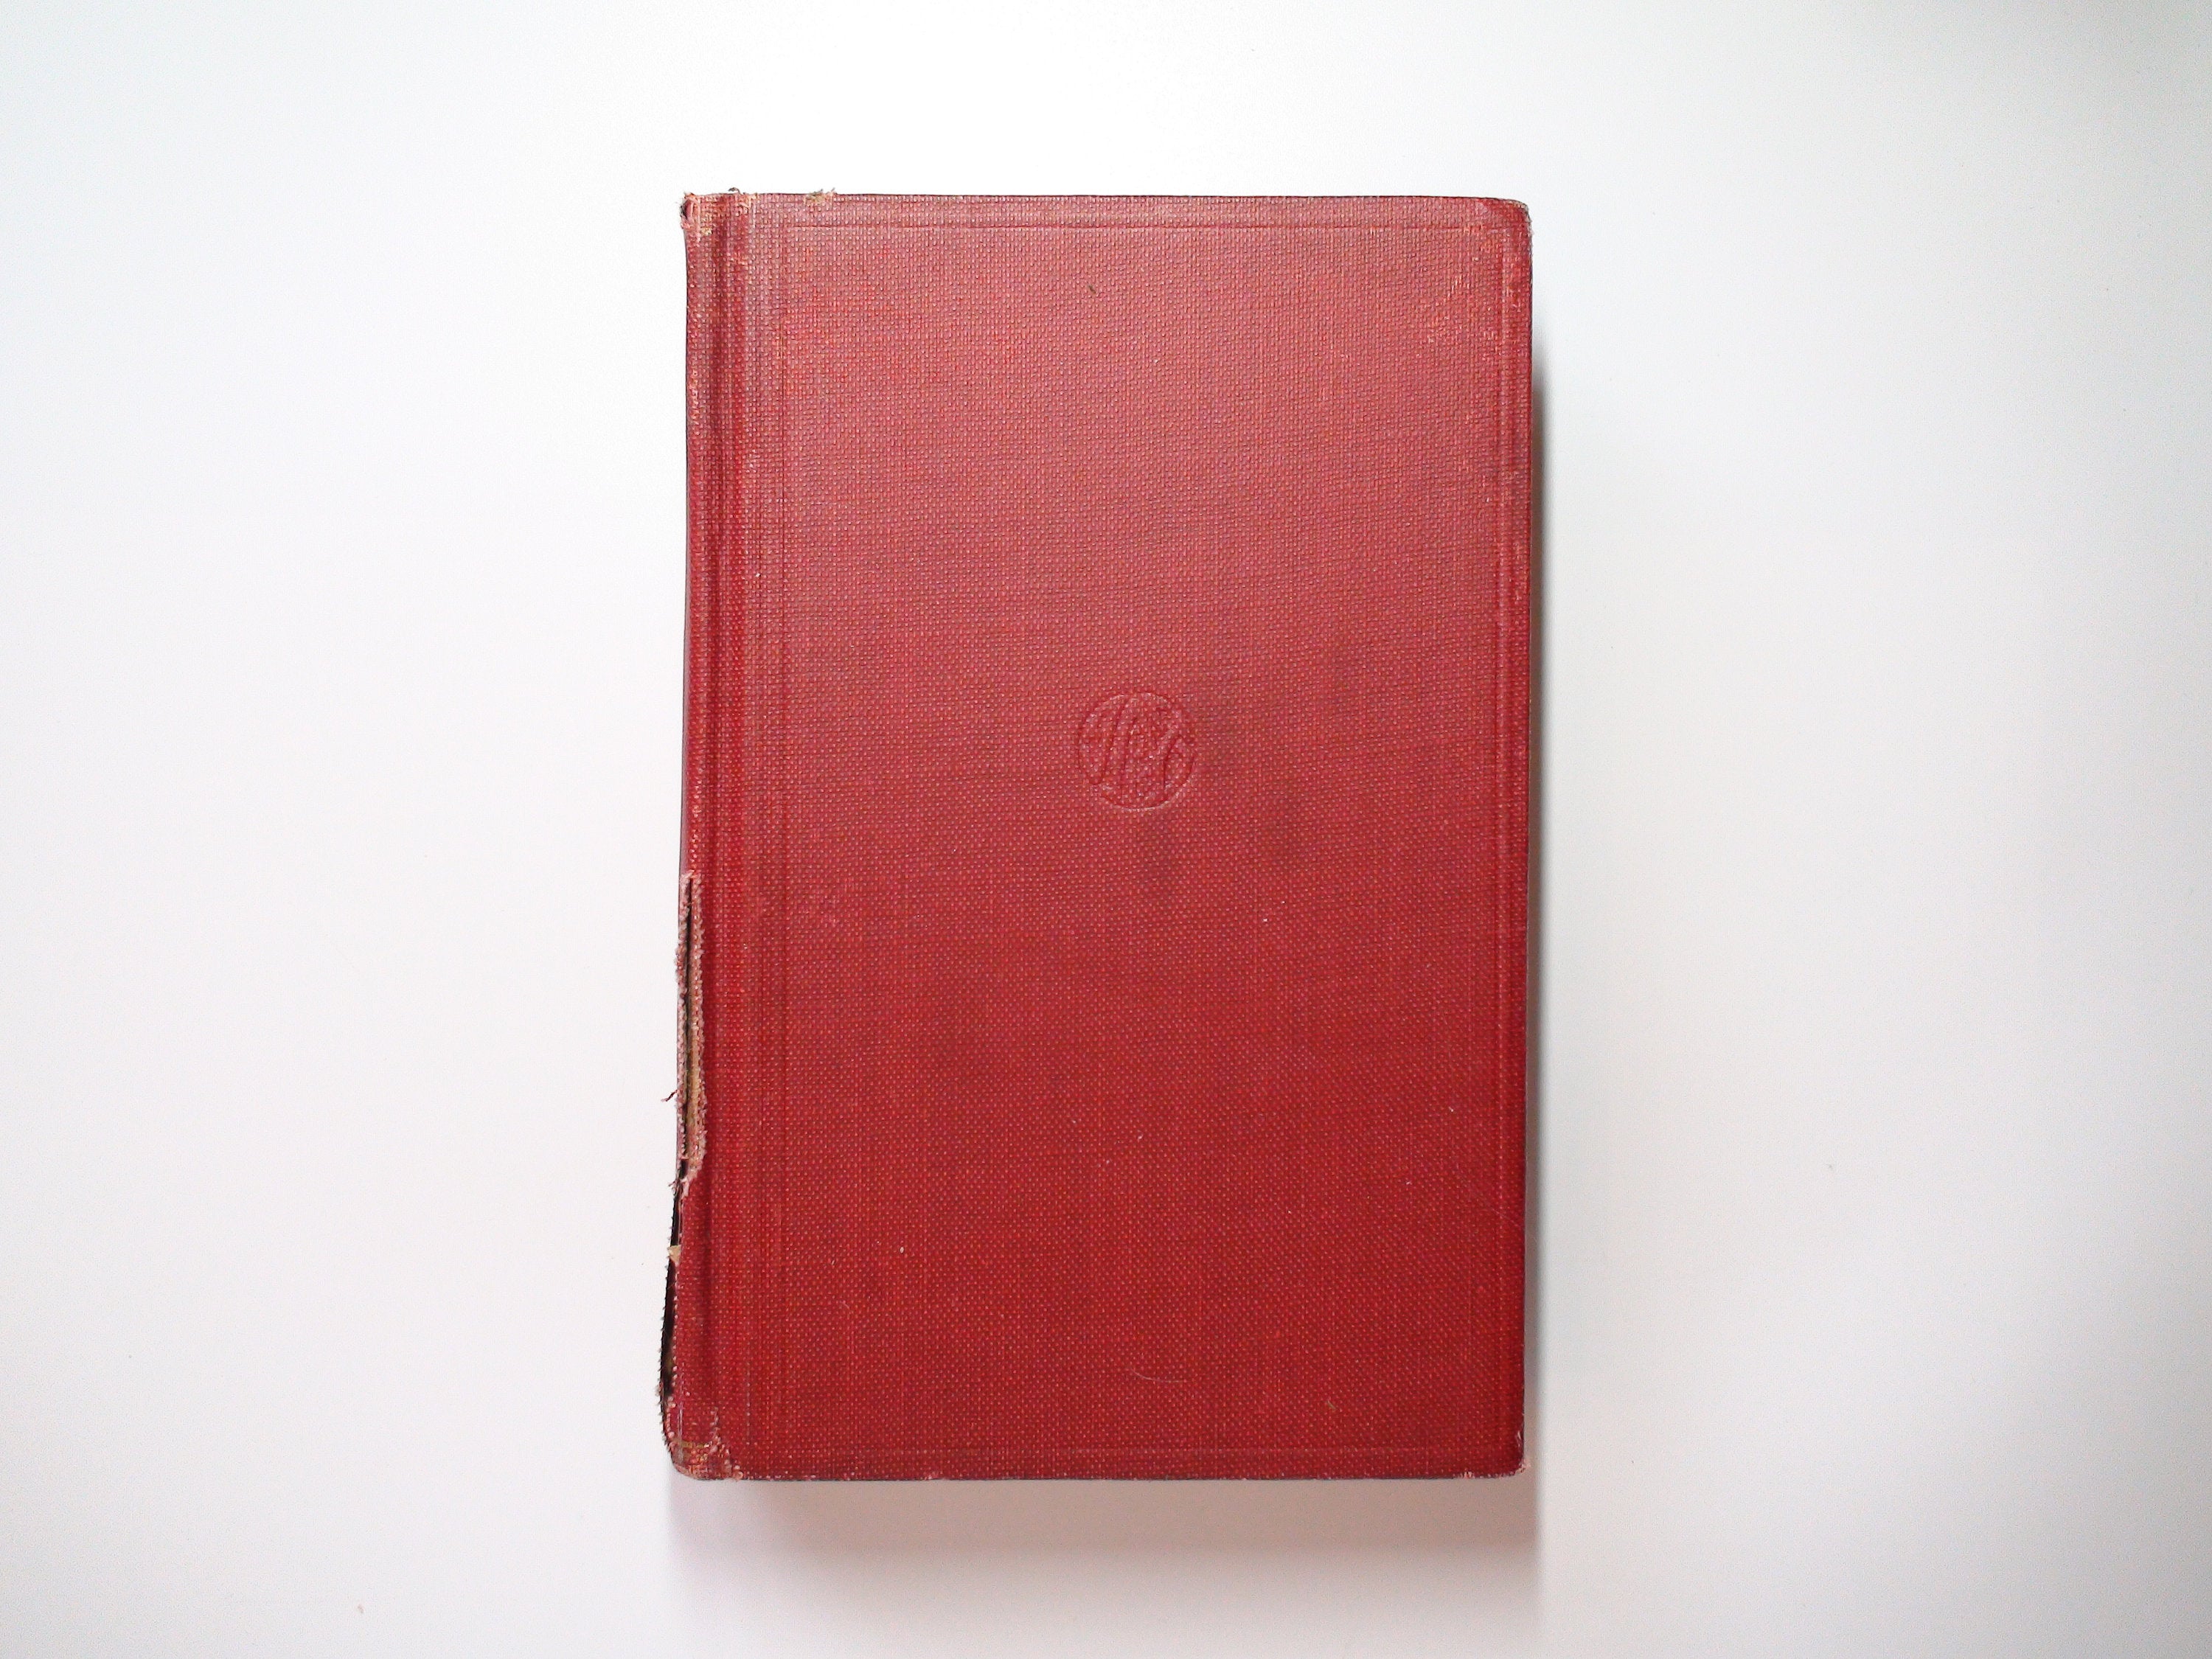 Radio Telegraphy and Telephony, by Rudolph L. Duncan, Illustrated, 1st Ed, 1929